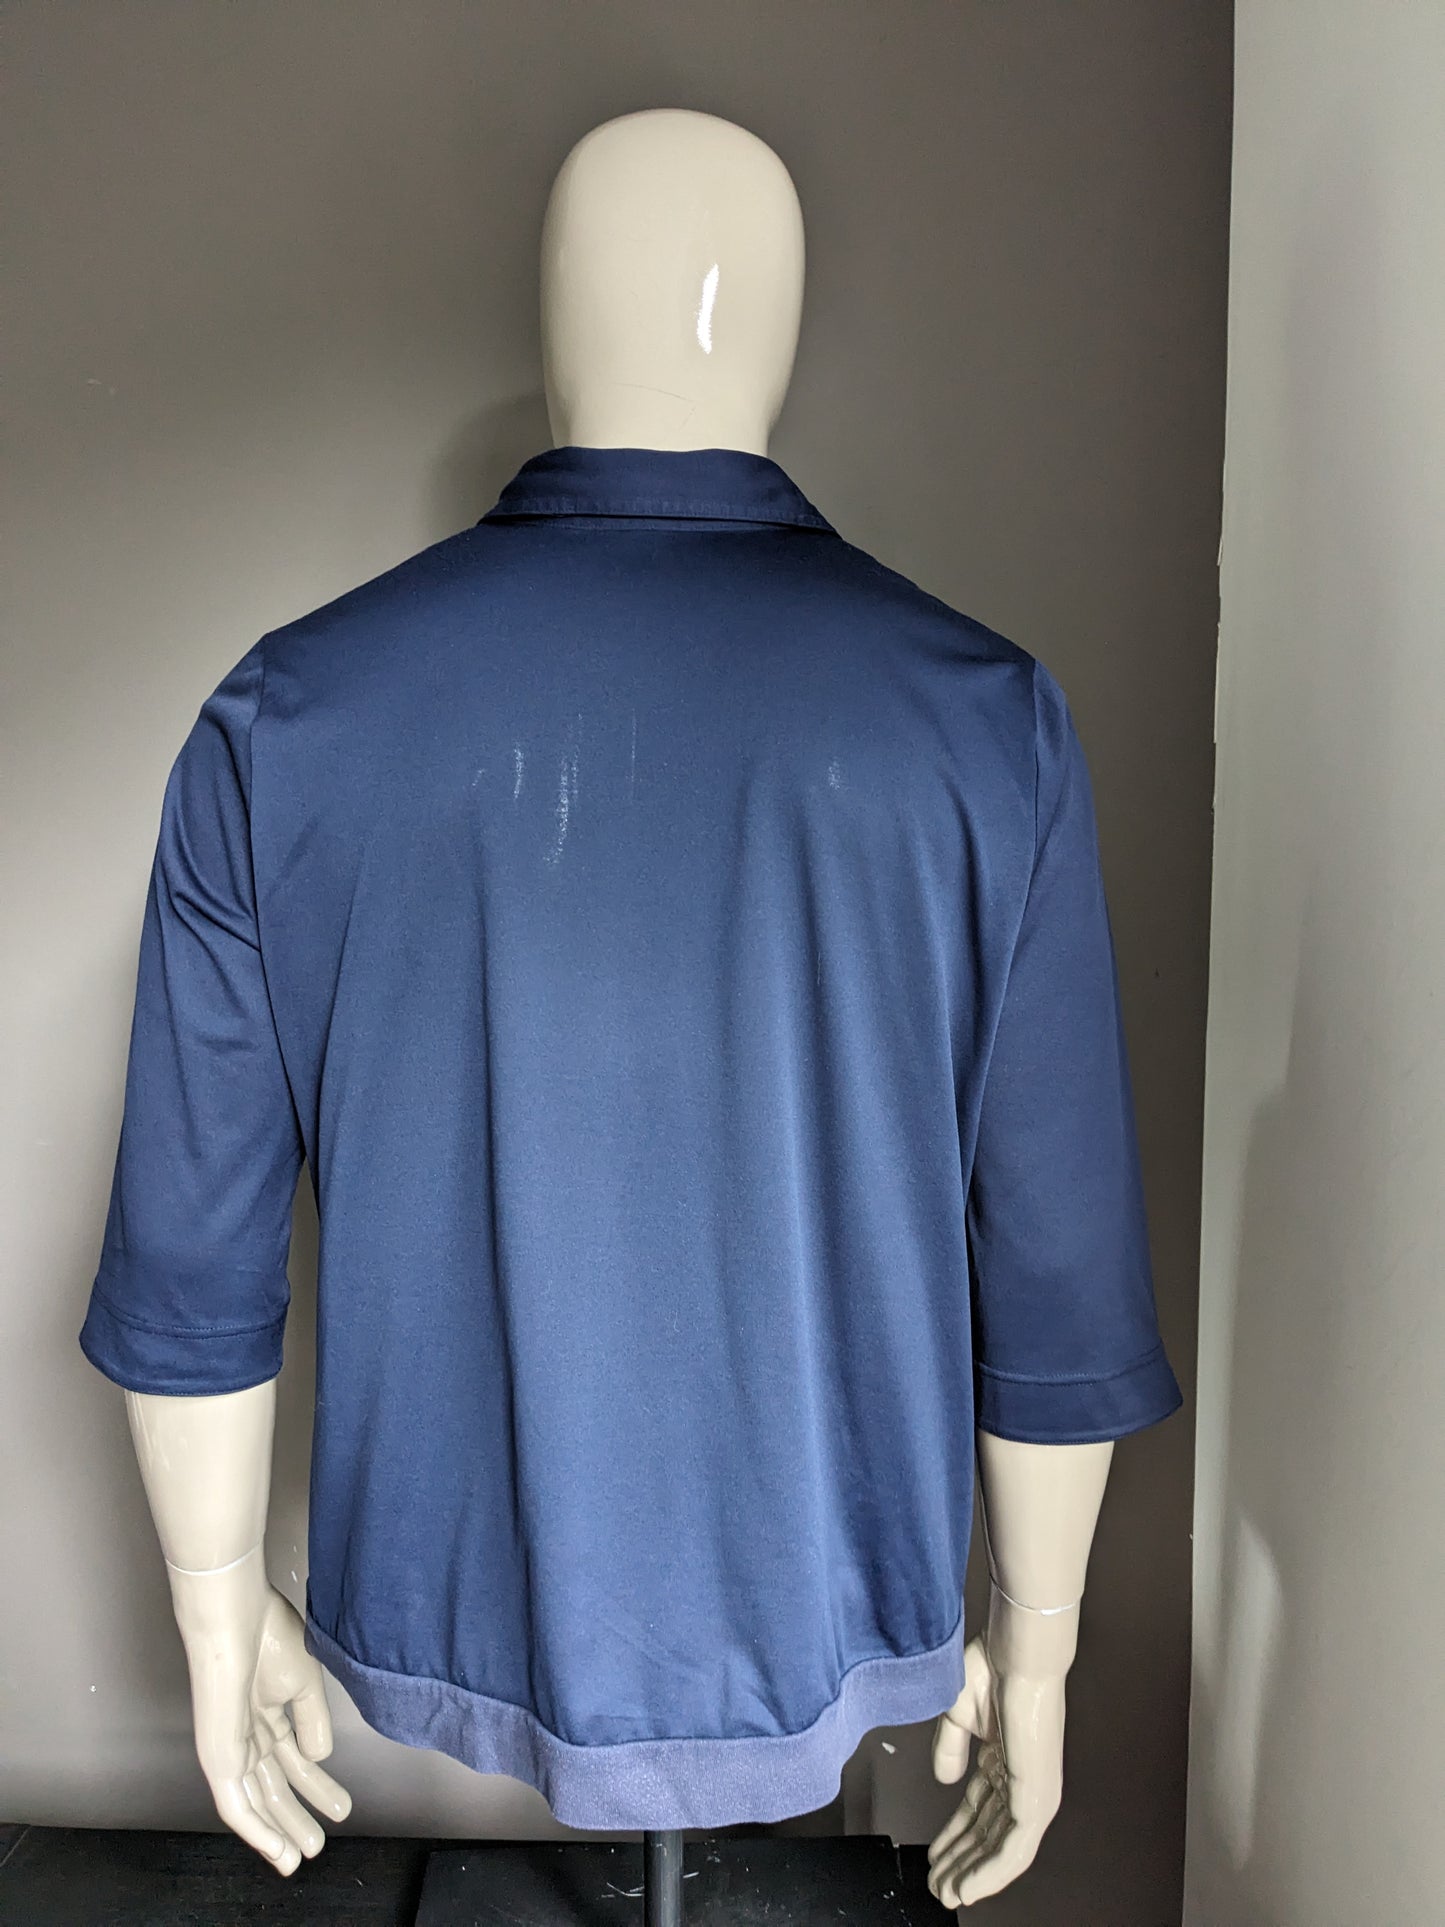 Vintage polo with elastic band and zipper and 3/4th sleeves. Dark blue colored. Size XL.